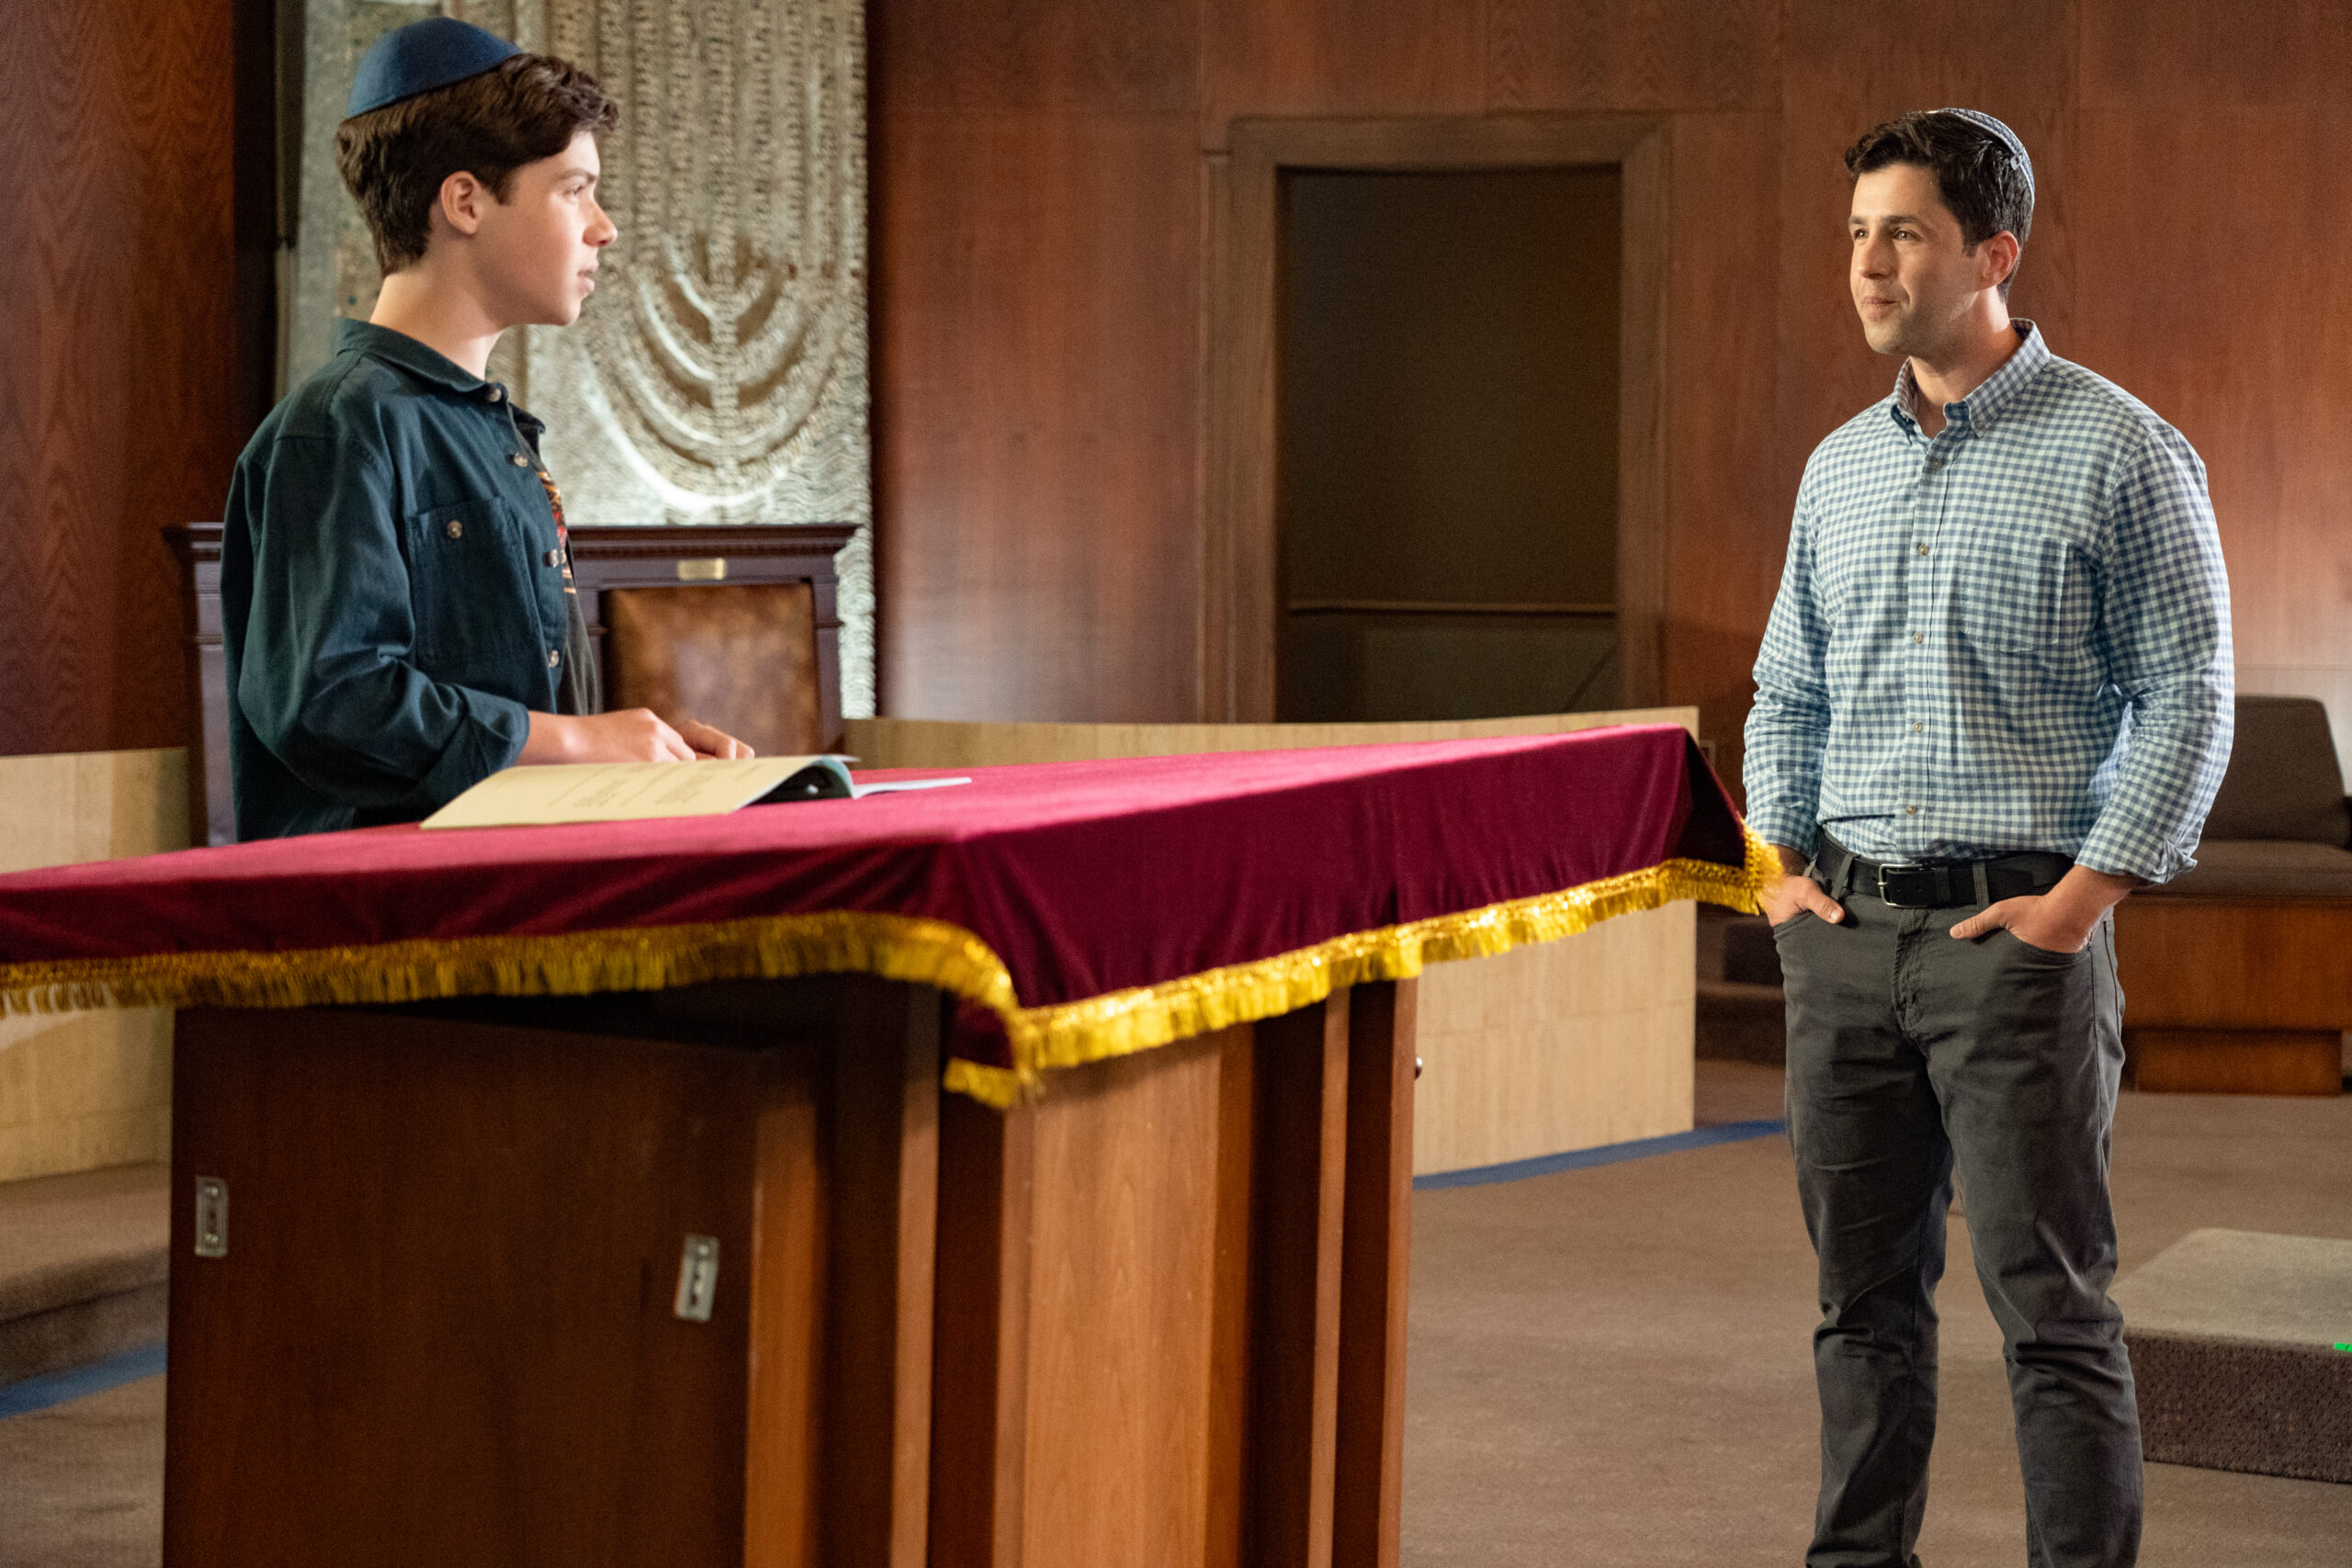 Eli Golden as Evan, Josh Peck as Rabbi in <i>13 The Musical</i>. Photo courtesy of Alan Markfield for Netflix.